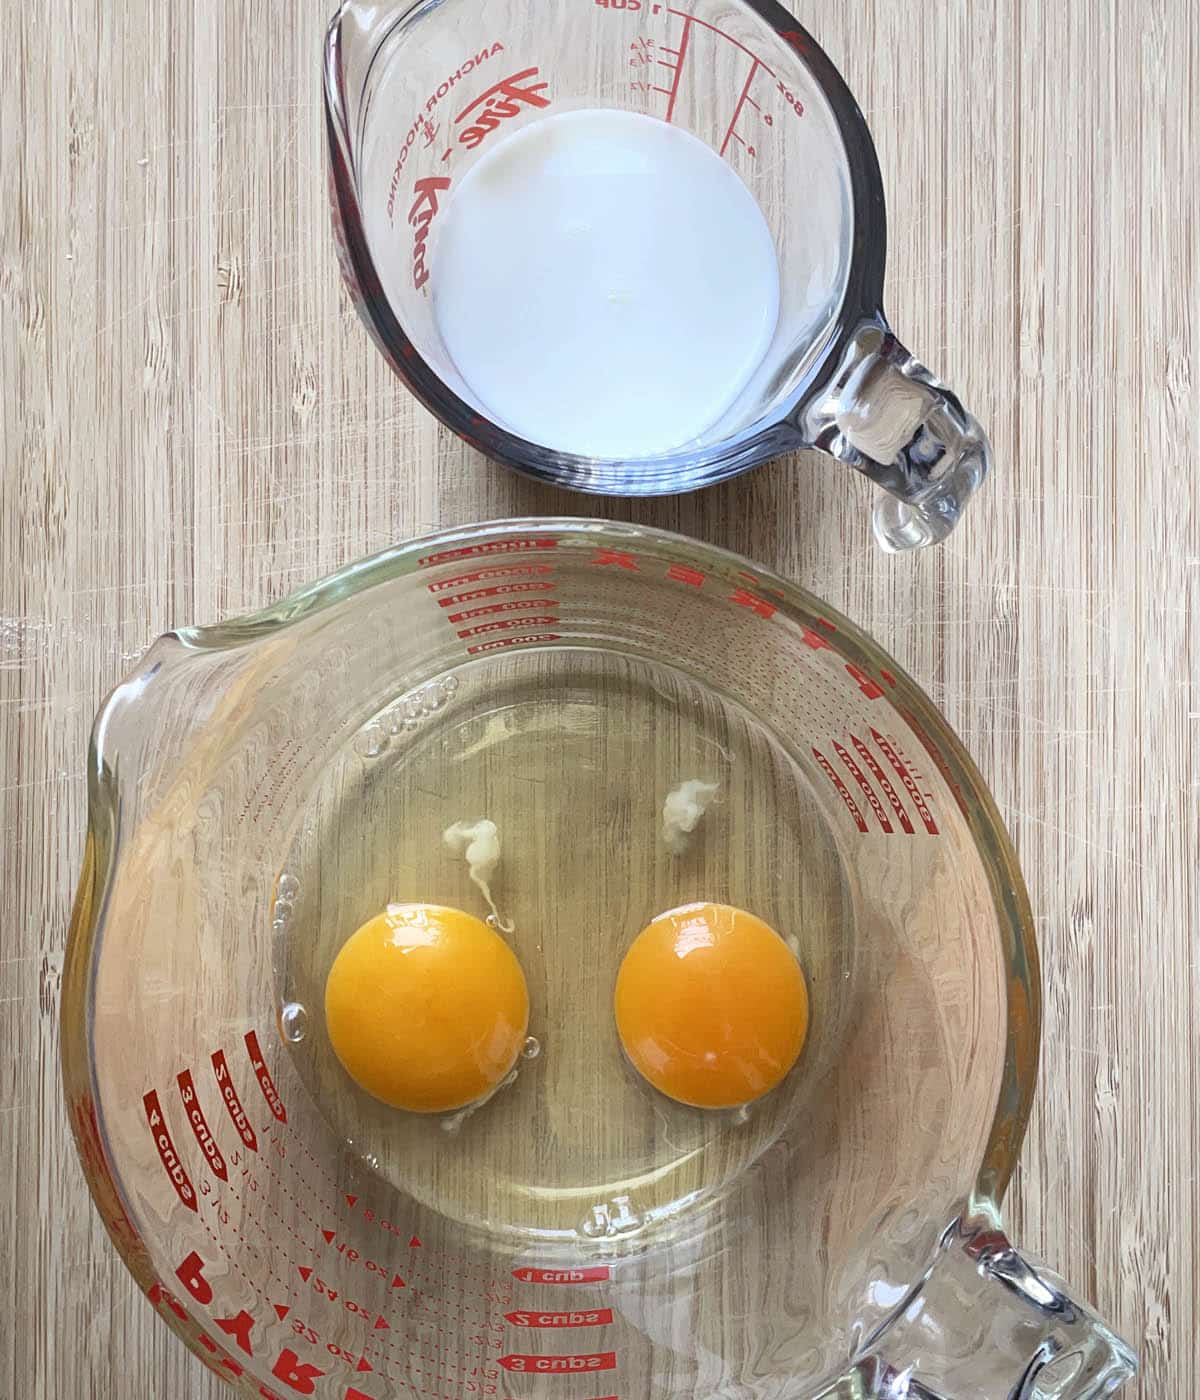 A large glass measuring cup containing two yellow egg yolks and whites, and a small glass measuring cup containing white milk.